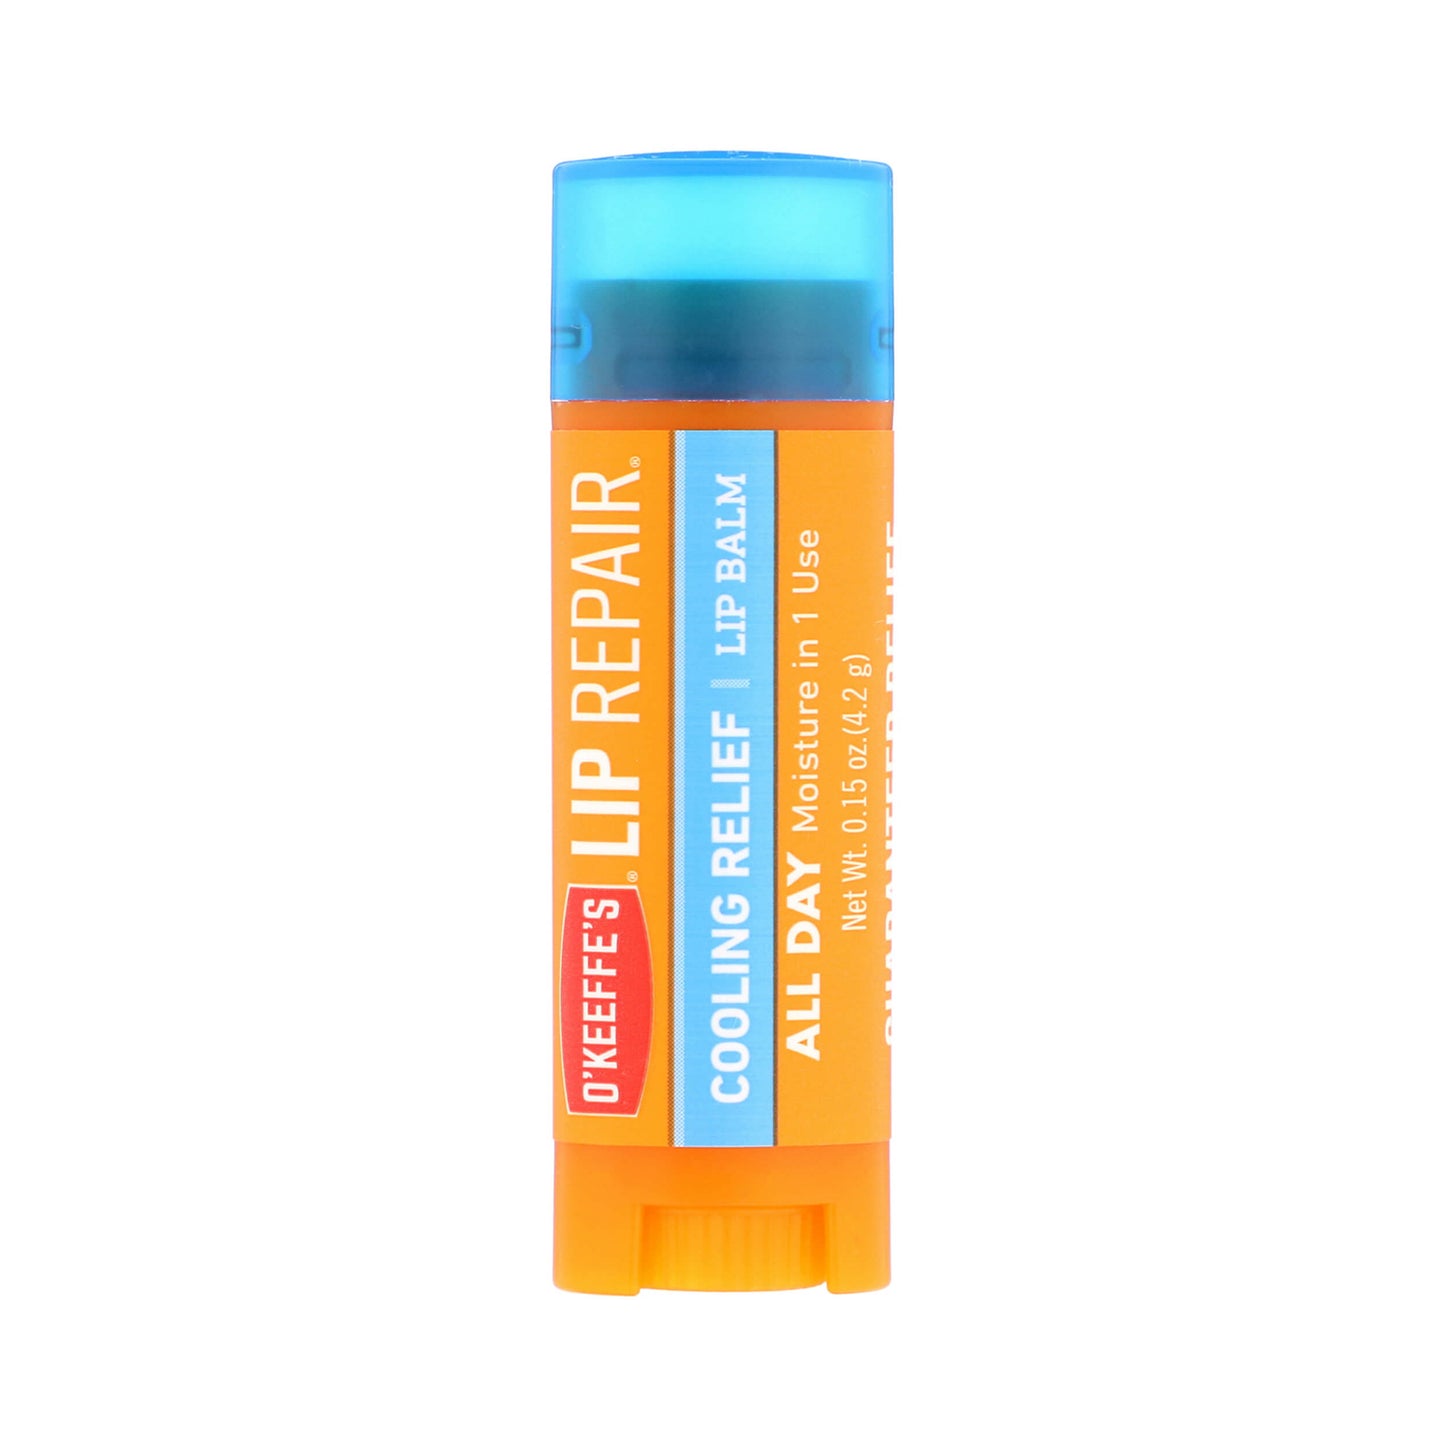 O'Keeffe's Cooling Relief Lip Repair Balm 4.2g